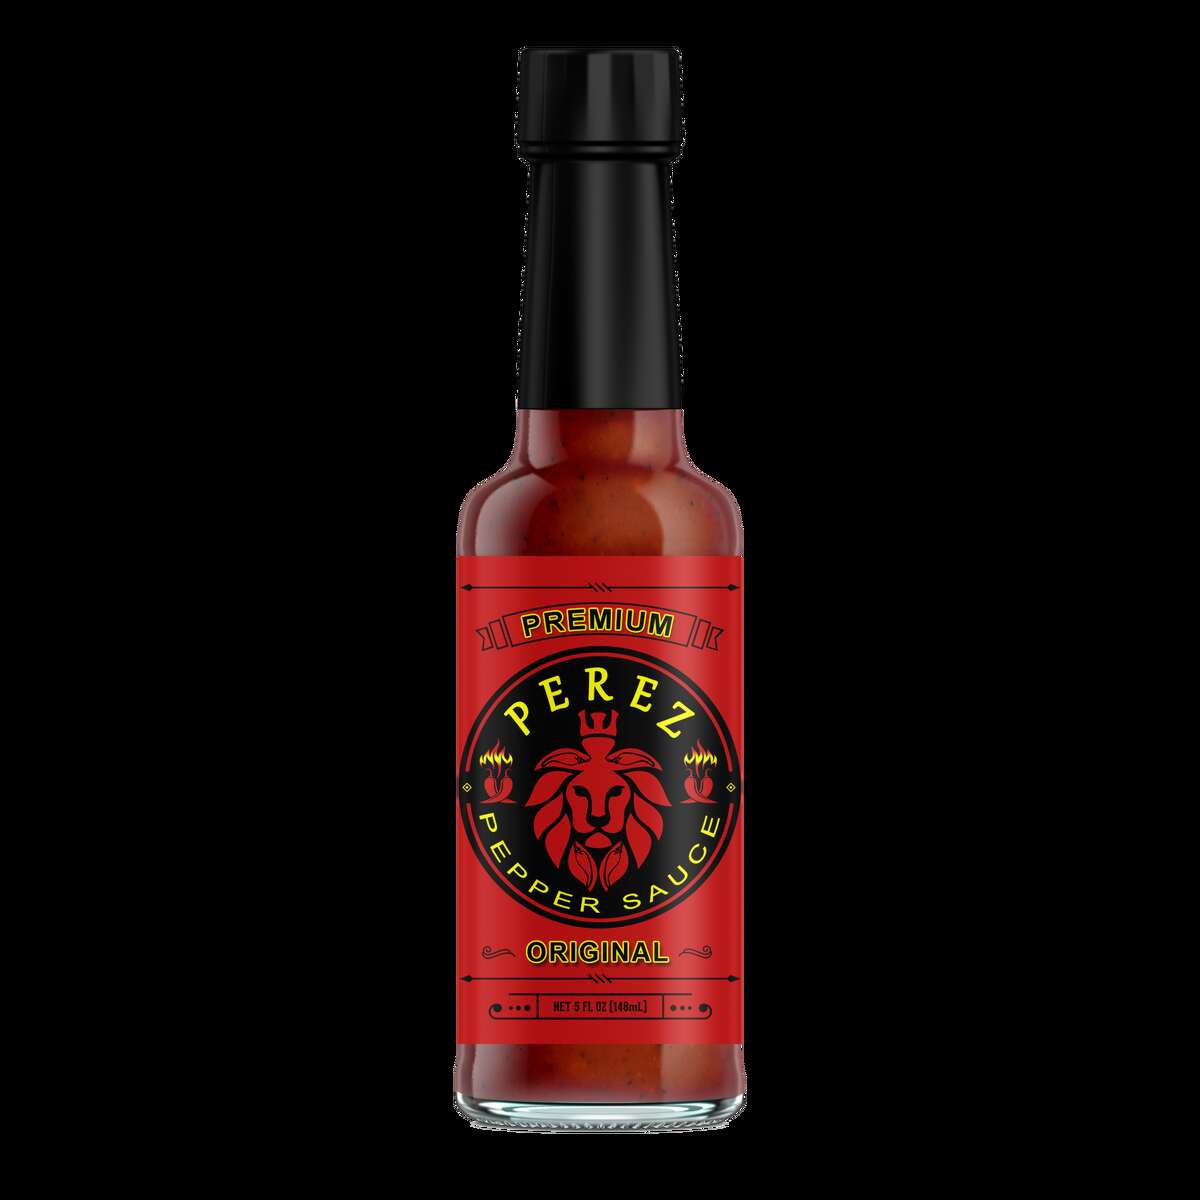 "Perez Pepper Sauce" is the new business co-founded by the husband of the Tejano legend Selena. He has been working with business partner John Gomez to bring "Tongues Ablaze LLC" to fruition since August. On Nov. 16, the small-batch hot sauce will be available online for worldwide shipping and at Trader's Village.